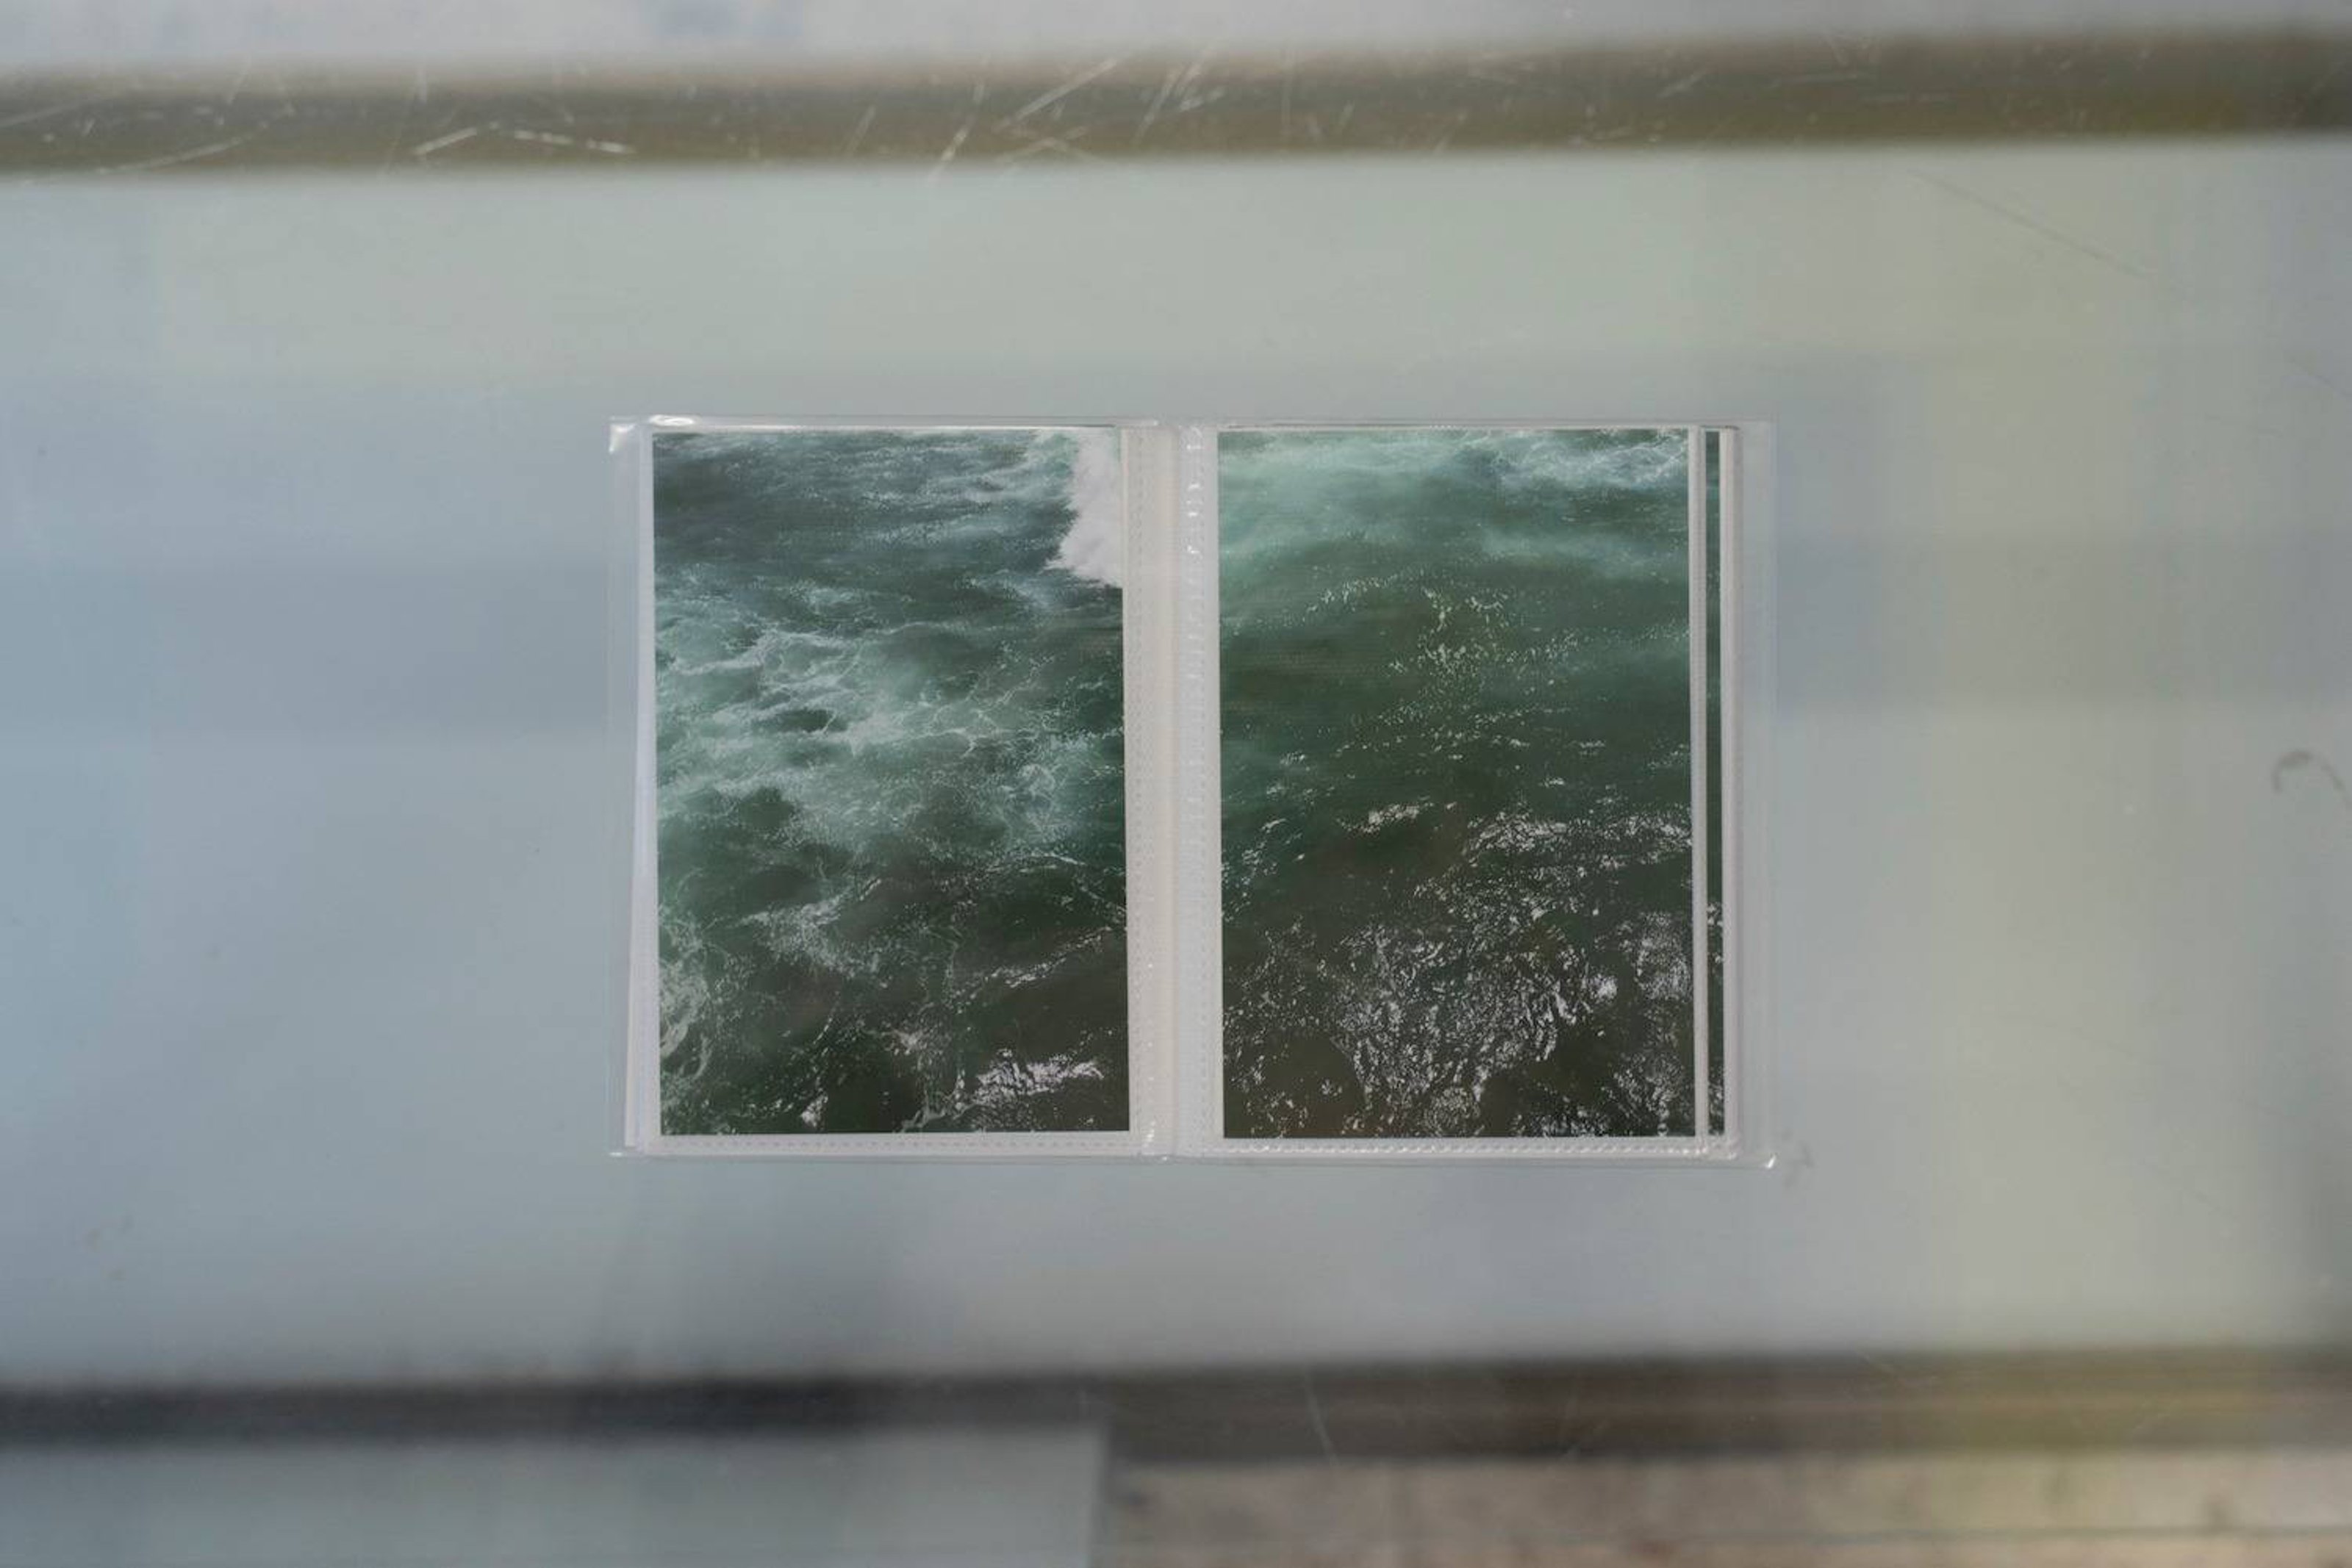 Photos taken from the sea are in a photo album, on a glass shelf.